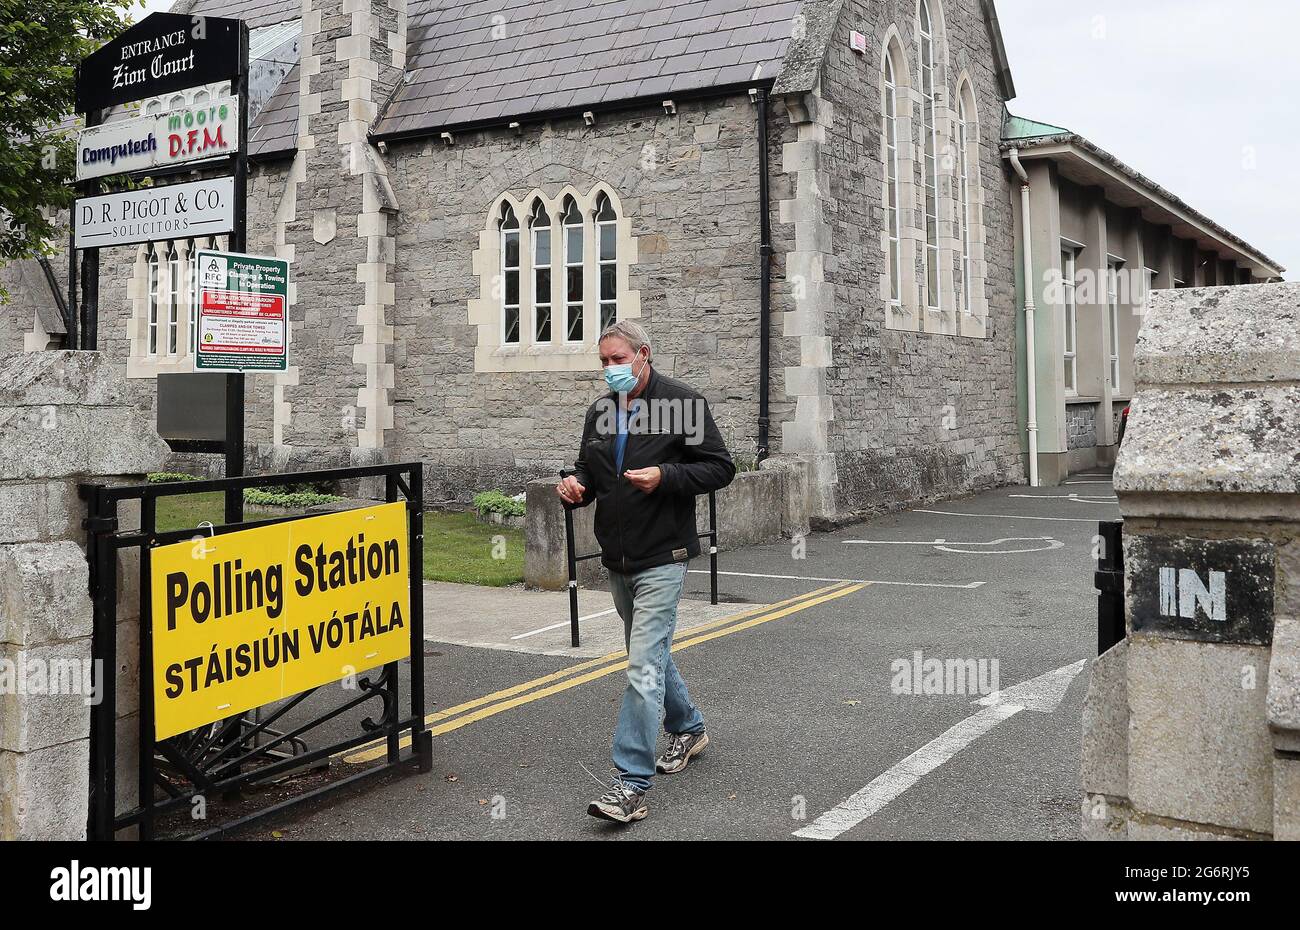 A man leaves a polling station in Rathgar, Dublin, as voting in the Dublin Bay South by-election is under way. Polls opened at 7am and will close at 10.30pm, before the count begins on Friday. Picture date: Thursday July 8, 2021. The vote follows weeks of campaigning in the race to succeed ex-Fine Gael minister Eoghan Murphy in the constituency. Stock Photo